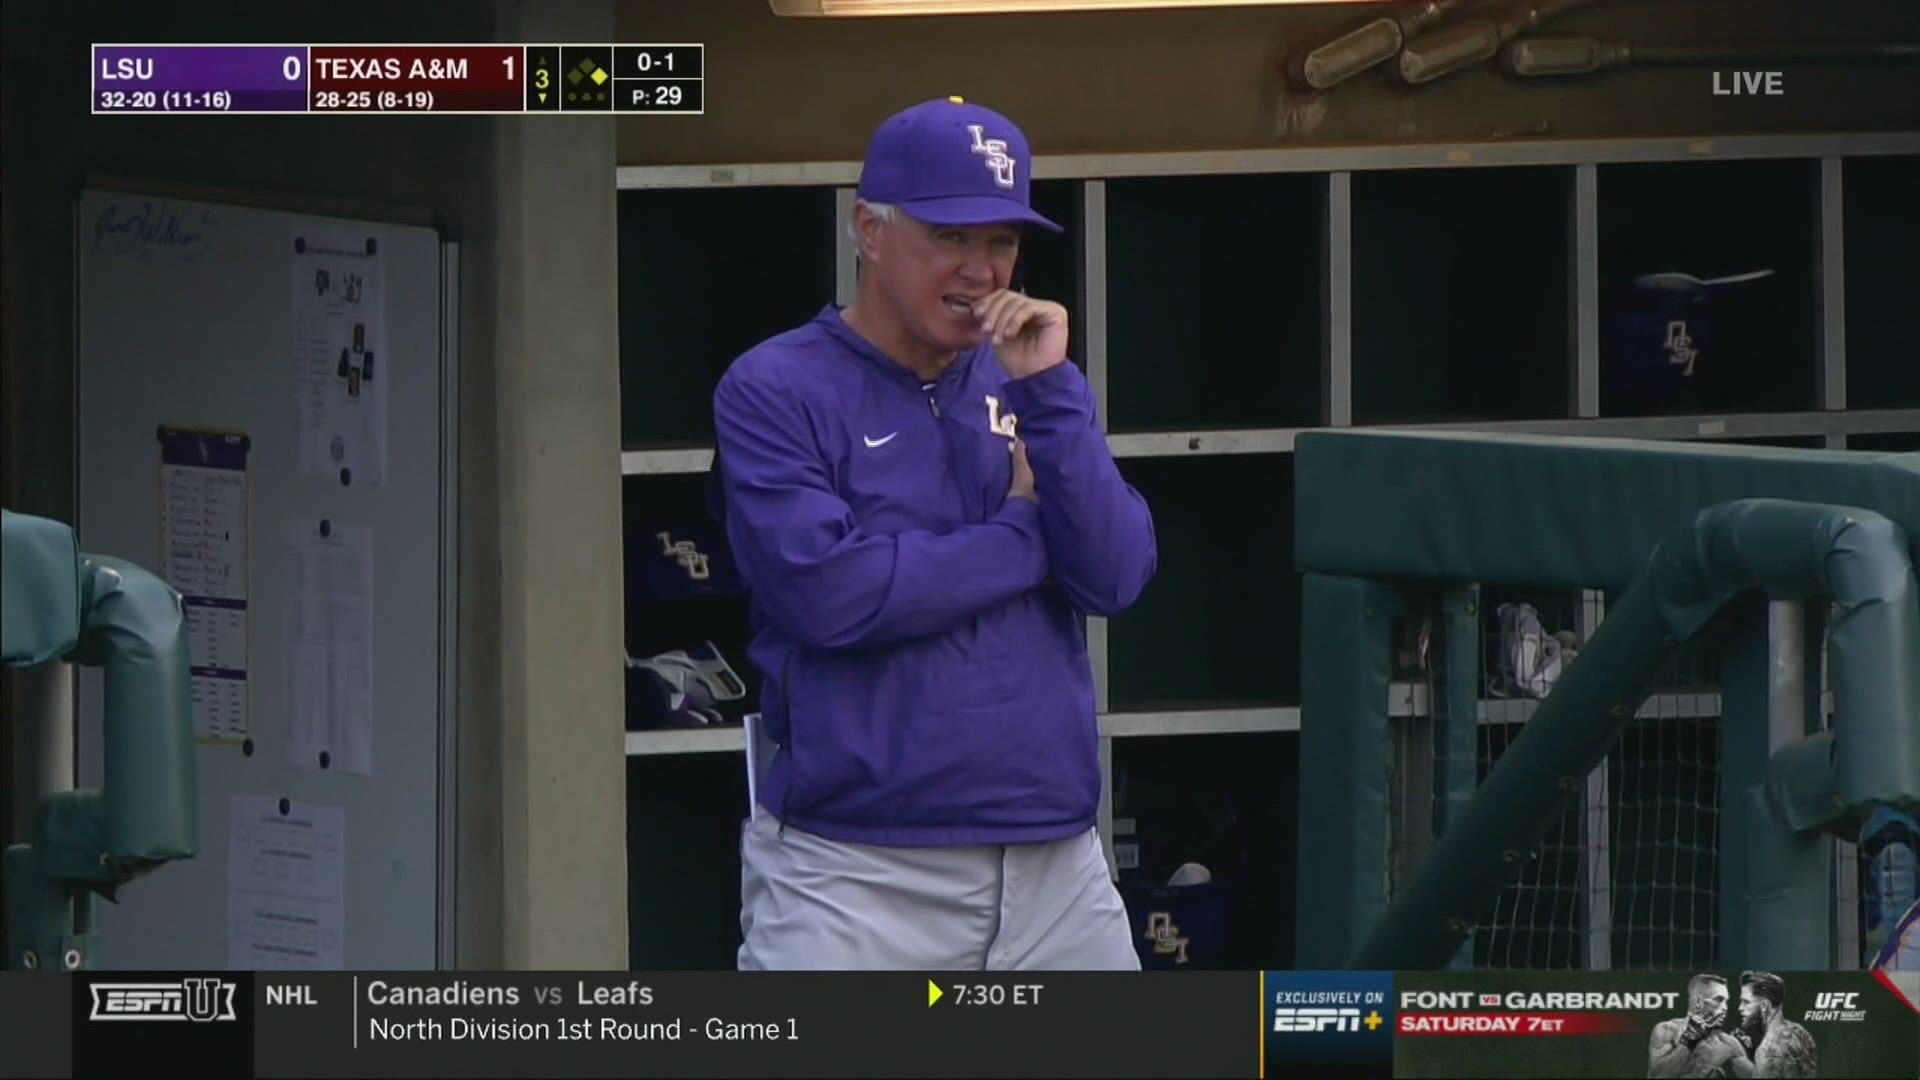 Coach Mainieri said he will coach the Tigers in the NCAA Tournament if they make the 64-team selection.